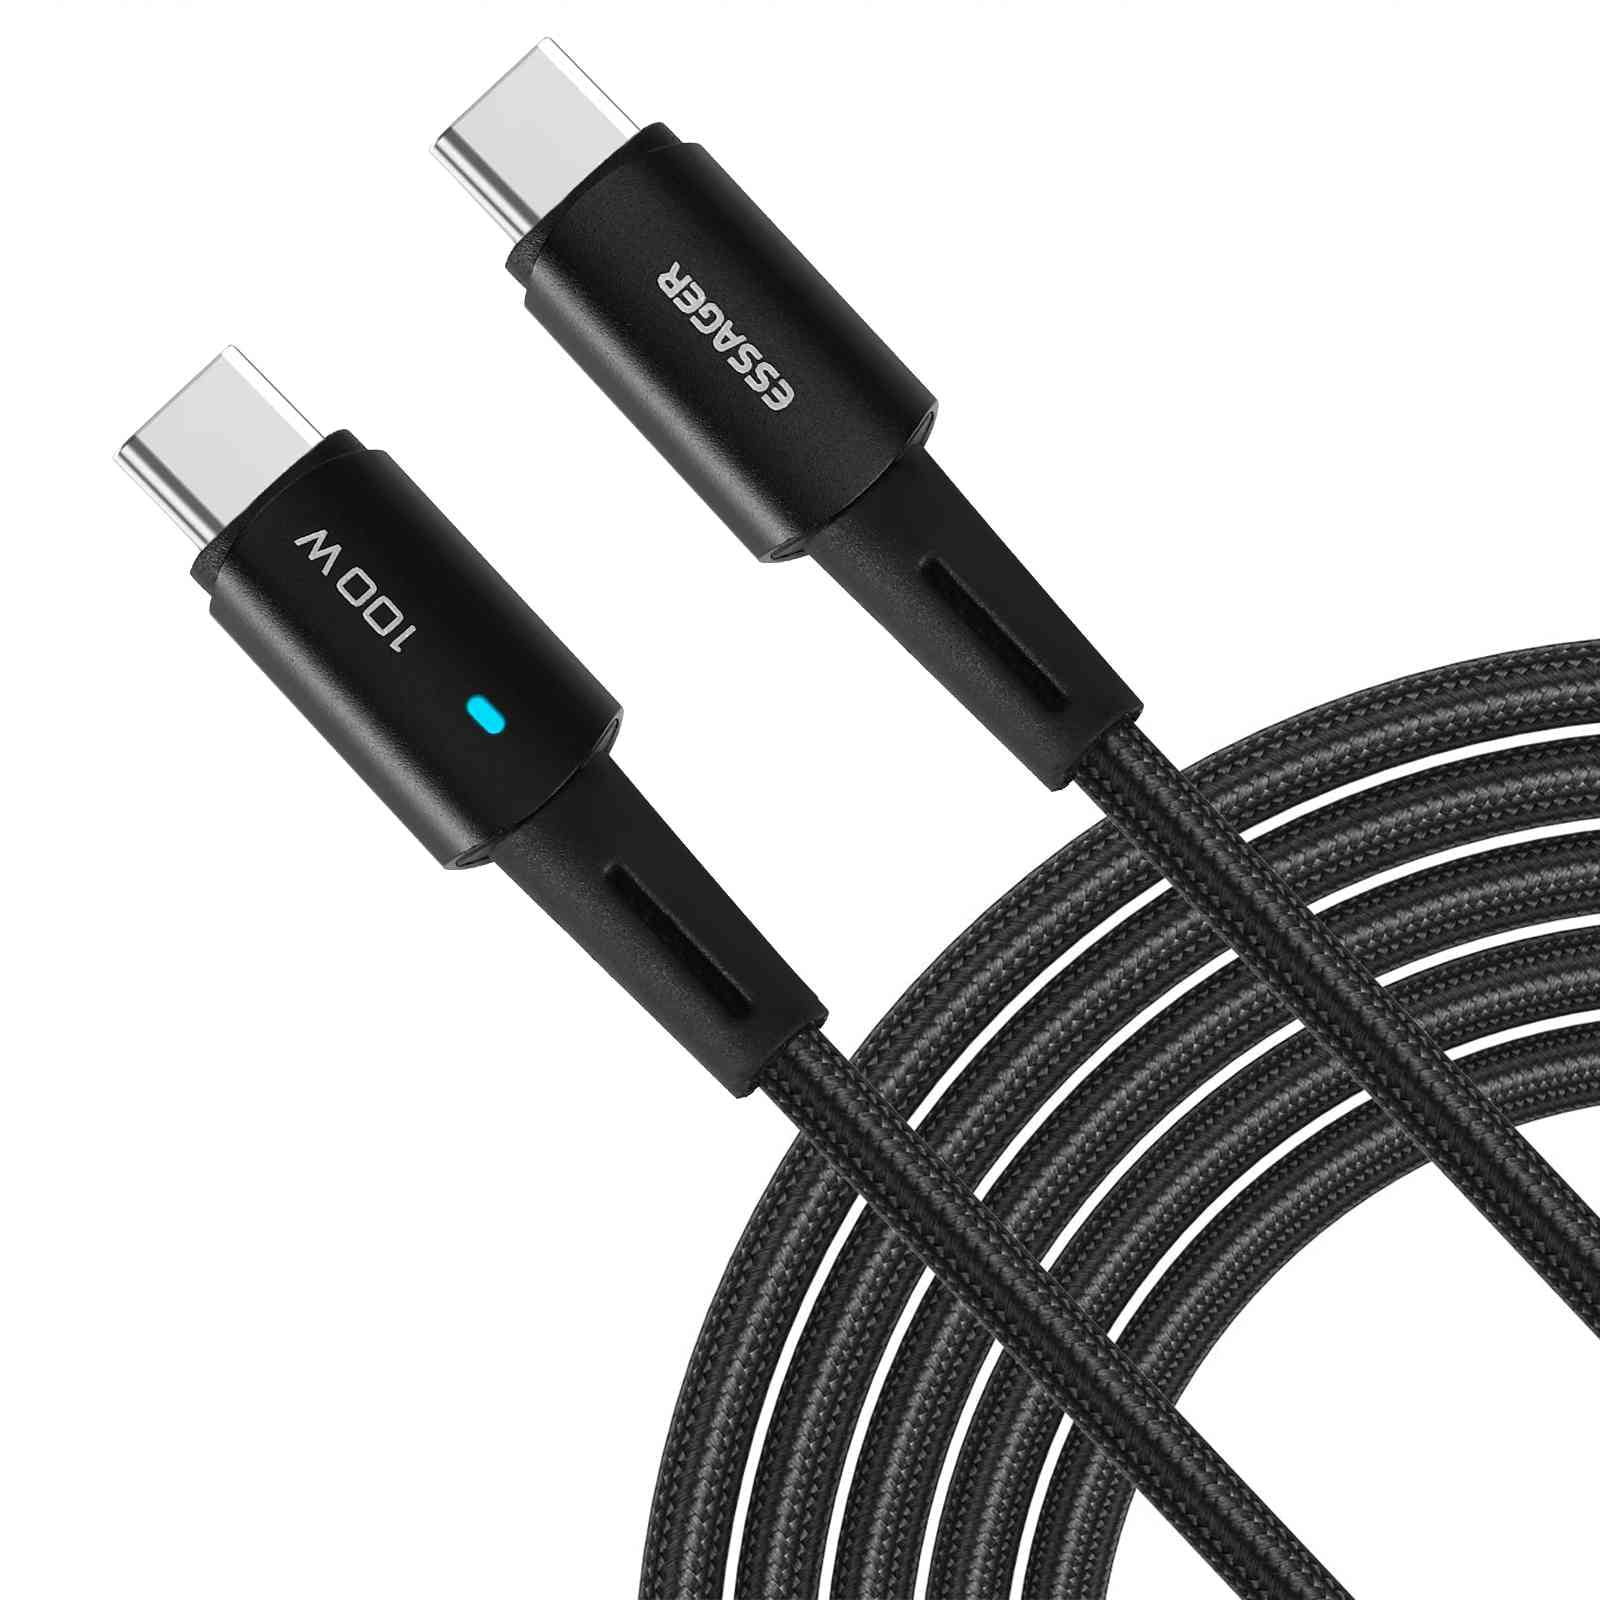 UrbanX USB C to USB C Cable 10ft 100W, 1Pack , USB 2.0 Type C Charging Cable Fast Charge for Motorola Moto G100, iPad Pro 2020, iPad Air 4, Samsung Galaxy S21, Pixel, Switch, LG, and More (Black)